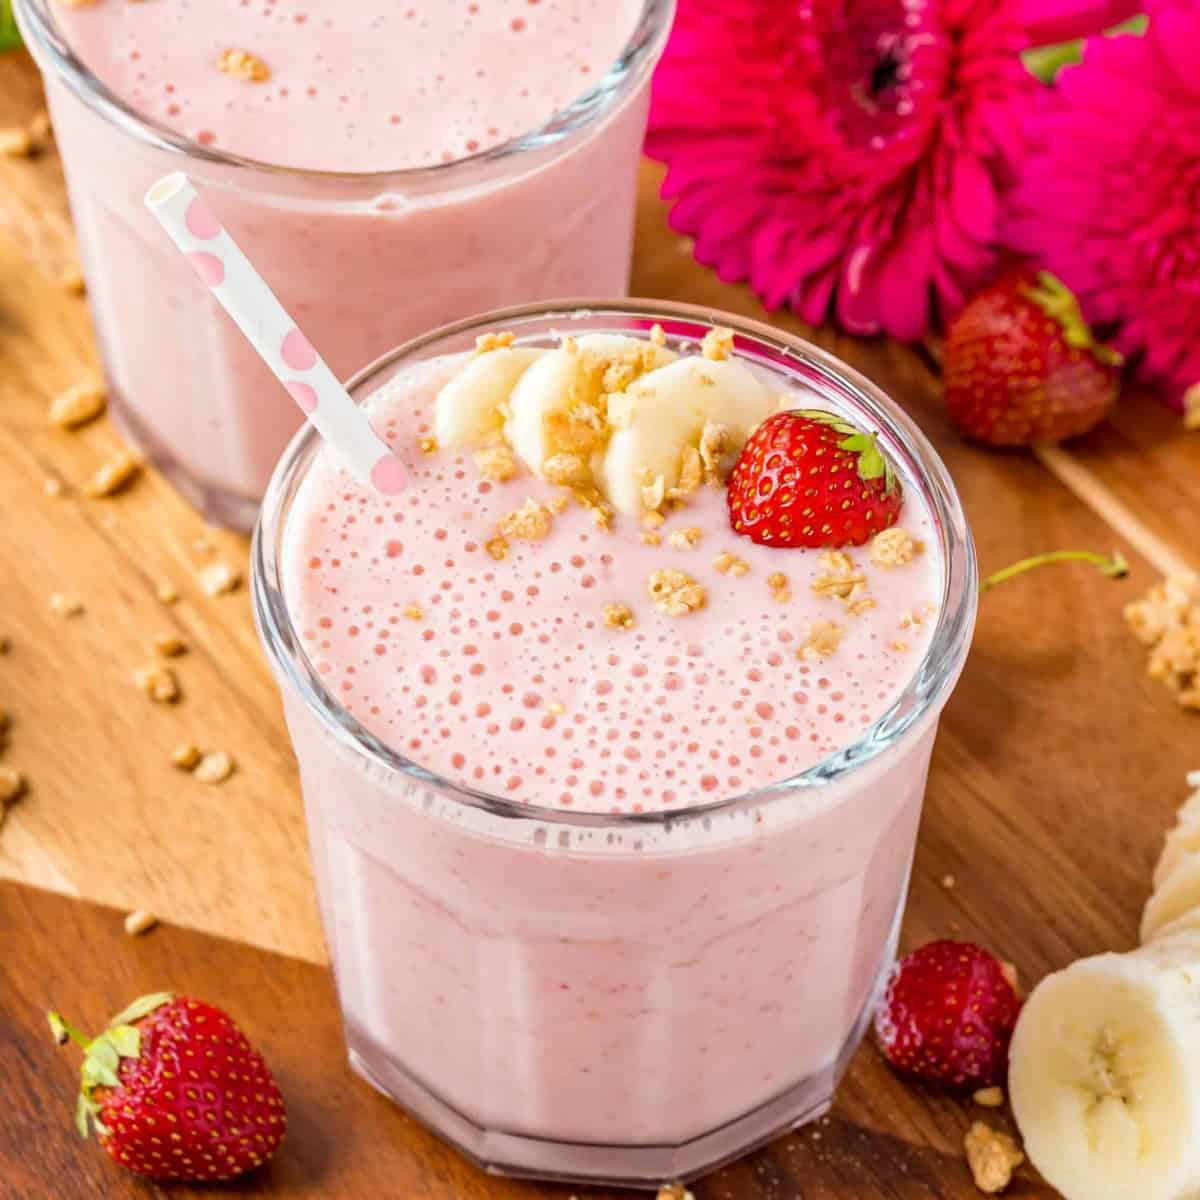 THE BEST STRAWBERRY BANANA SMOOTHIE